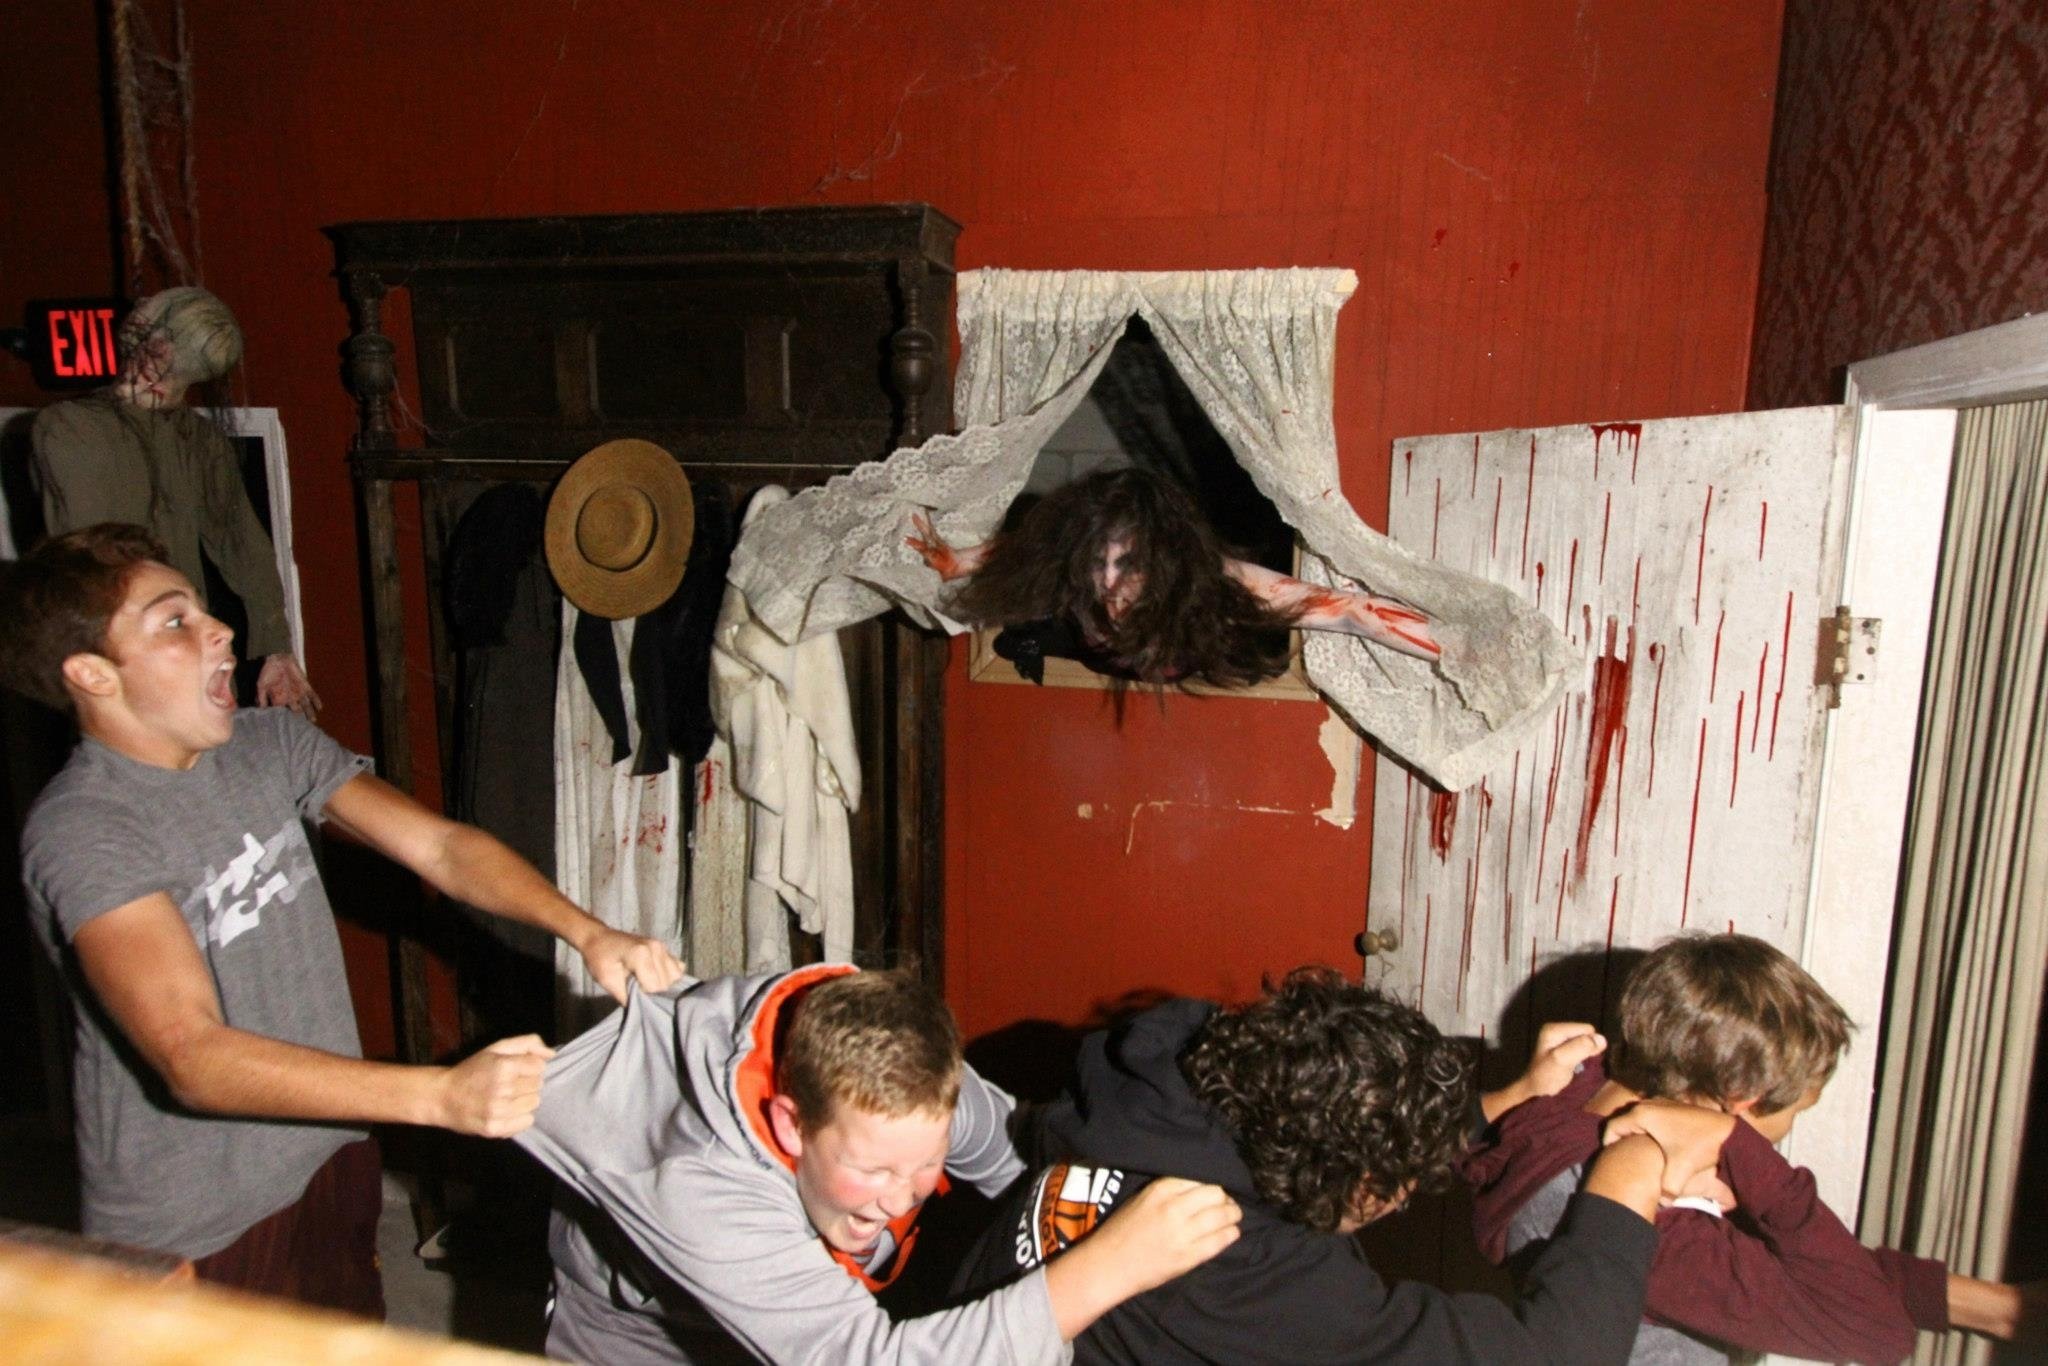 10 Trendy Haunted House Ideas For Adults creepyhaunted house idea someone under the table head through 2022